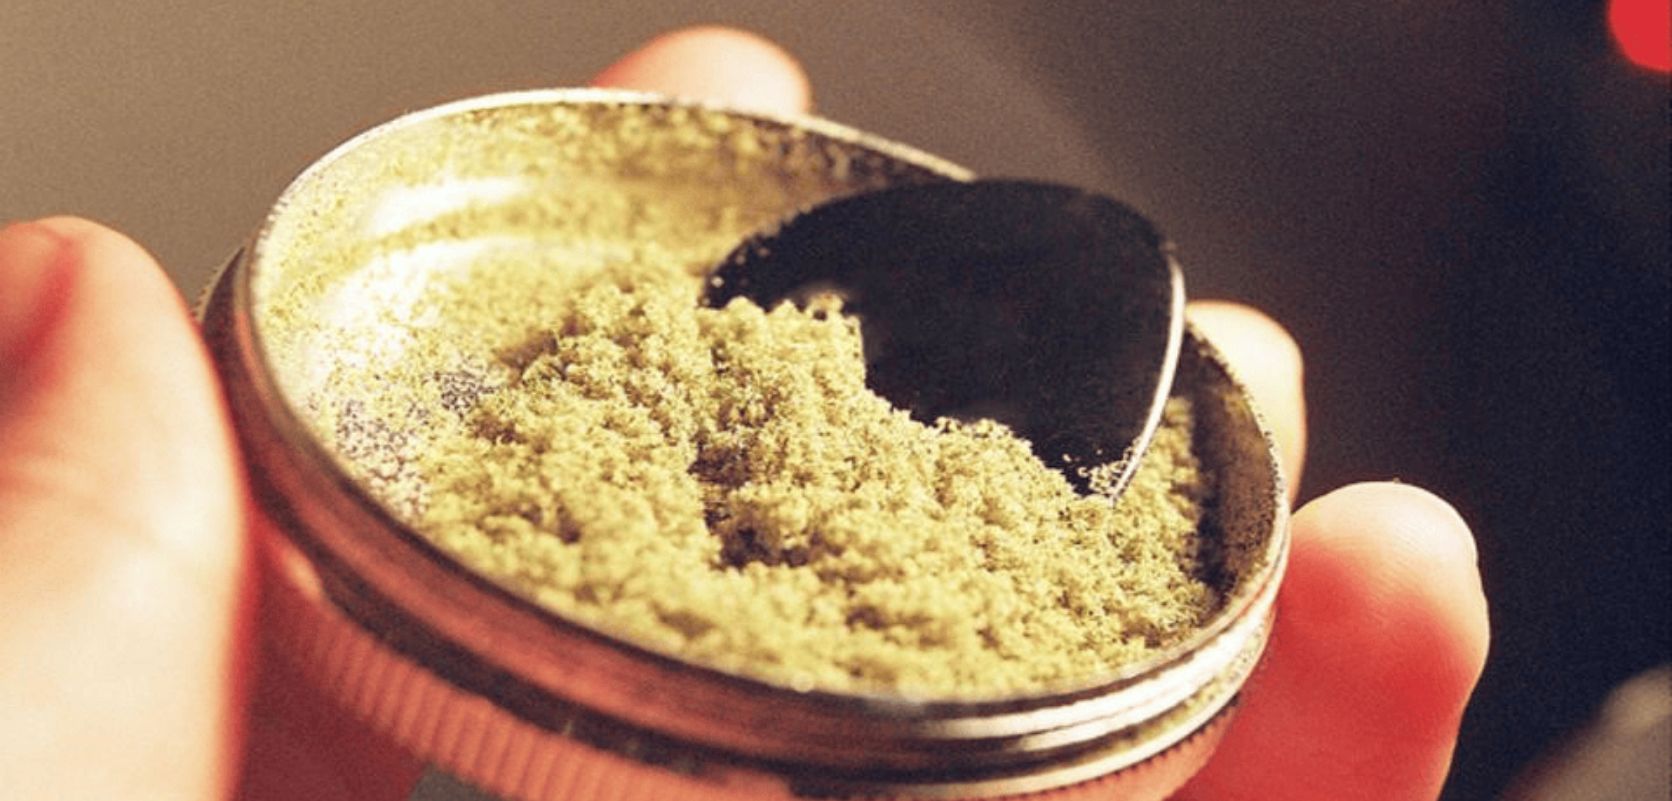 This is the easiest and most popular way to make keef weed at home. This method is used when you don’t need huge amounts of kief.